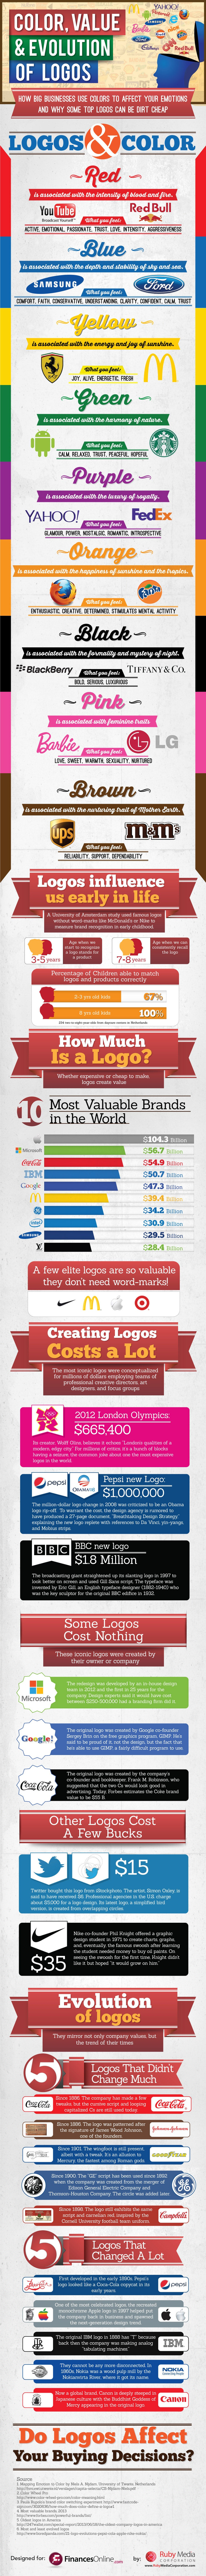 What Does the Color of Your Logo Say About Your Business? (Infographic)